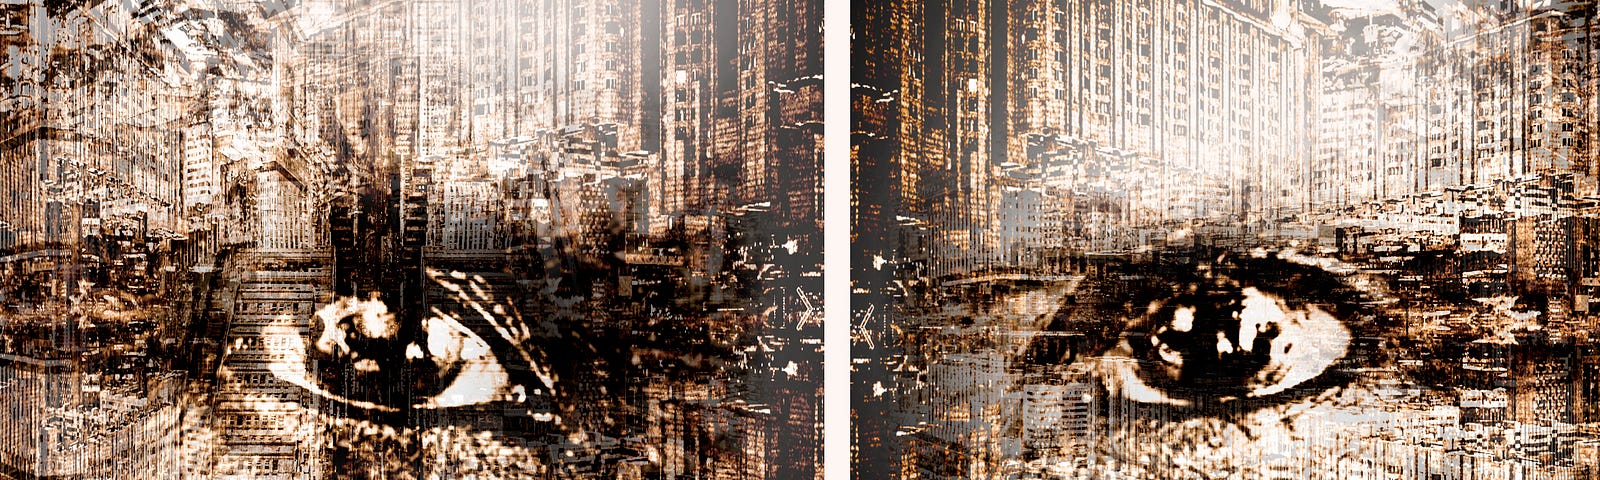 Image in 2 layers. First; 2 eyes looking straight at you. Second; patterns created out of skyline photos. All In brown and white tones. Without the thoughts there will be on thinker.